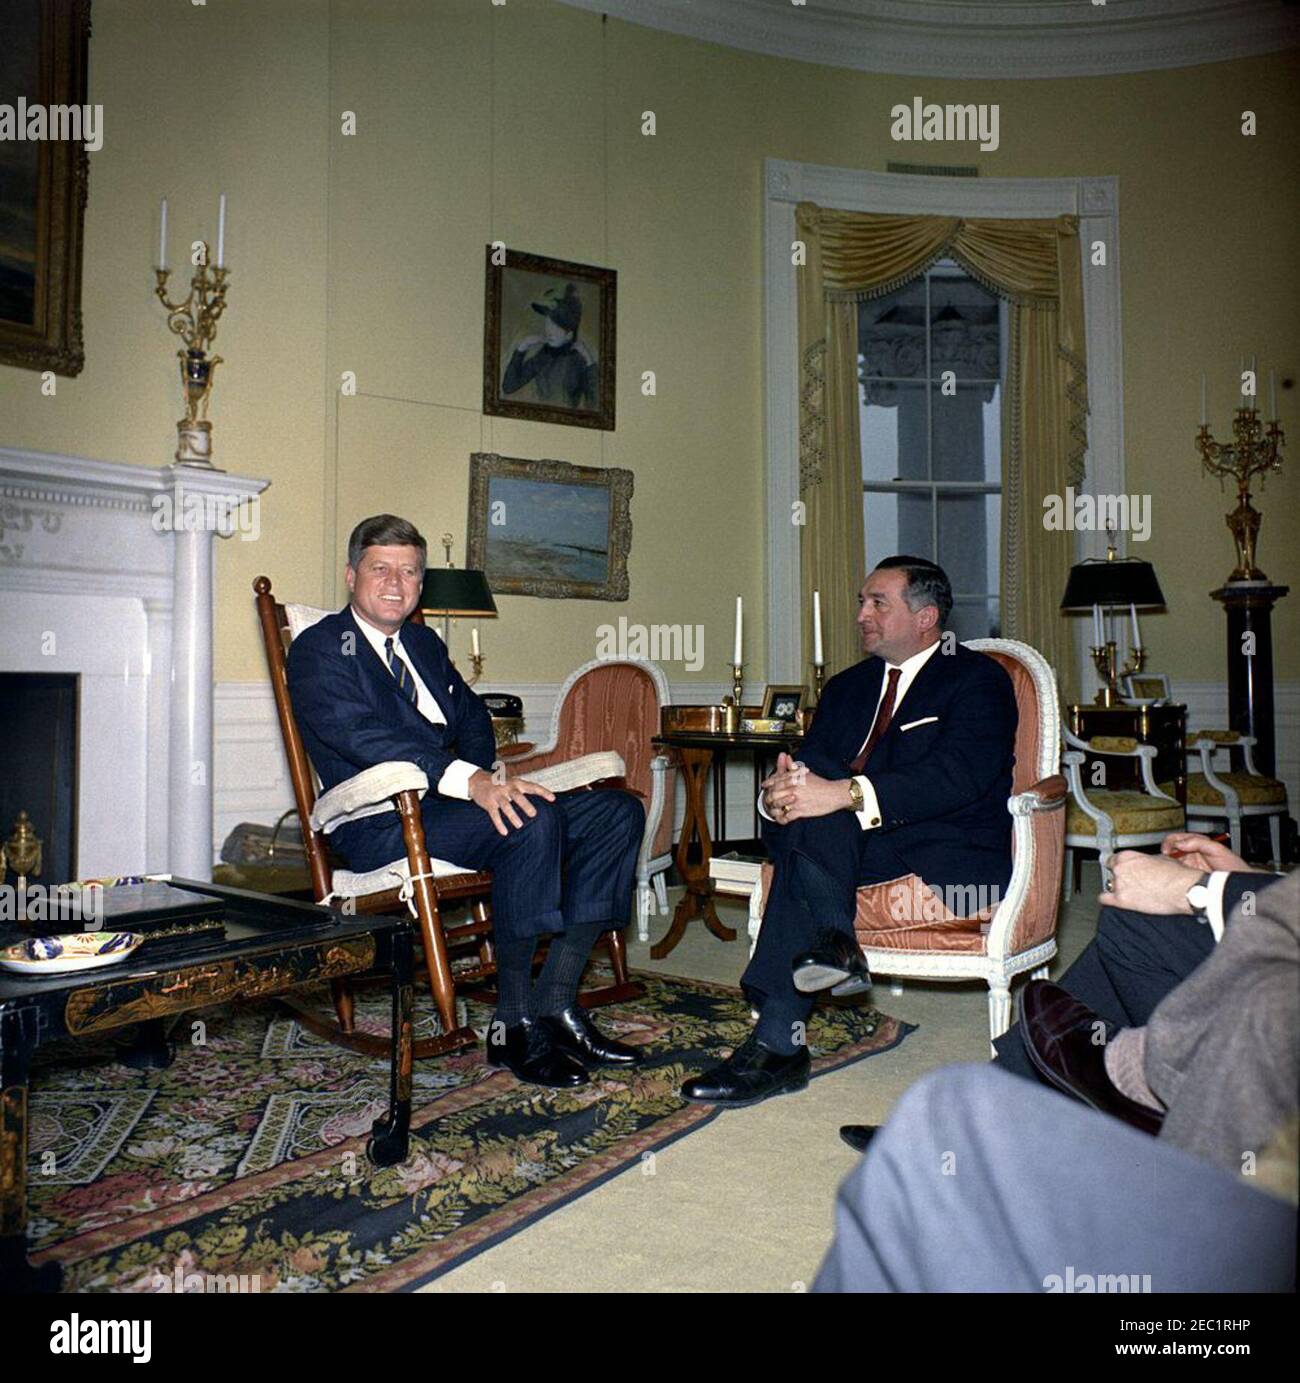 Meeting with Dr. Erich Mende, Chairman, Free Democratic Party, West Germany, 4:00PM. President John F. Kennedy (in rocking chair) meets with Chairman of the Free Democratic Party of West Germany, Dr. Erich Mende. Yellow Oval Room, White House, Washington, D.C. Stock Photo